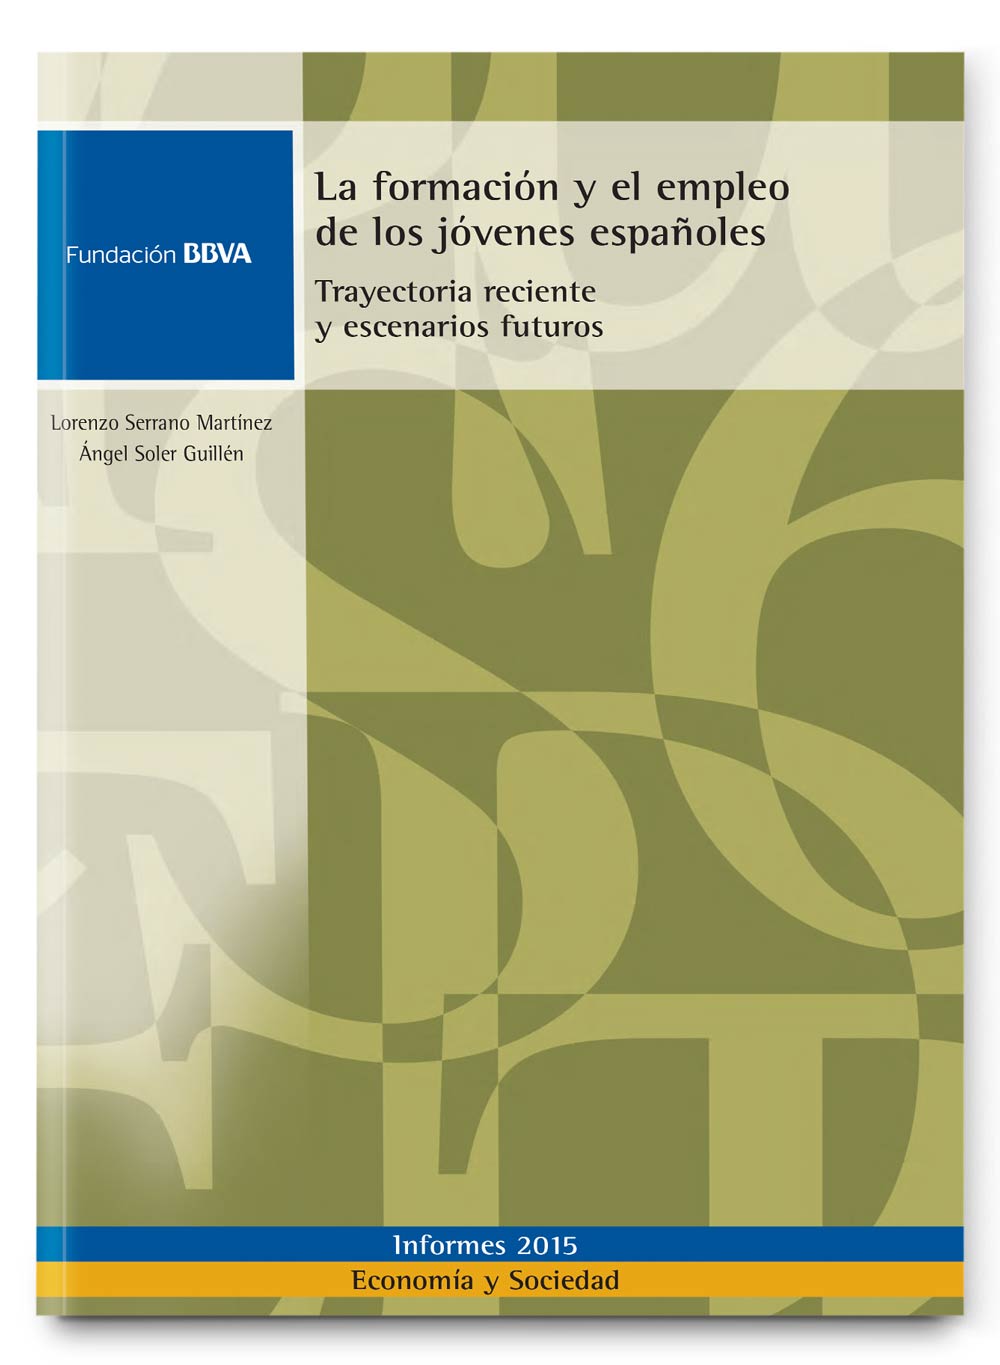 Training and employment of young Spanish people: Recent, past and future scenarios 